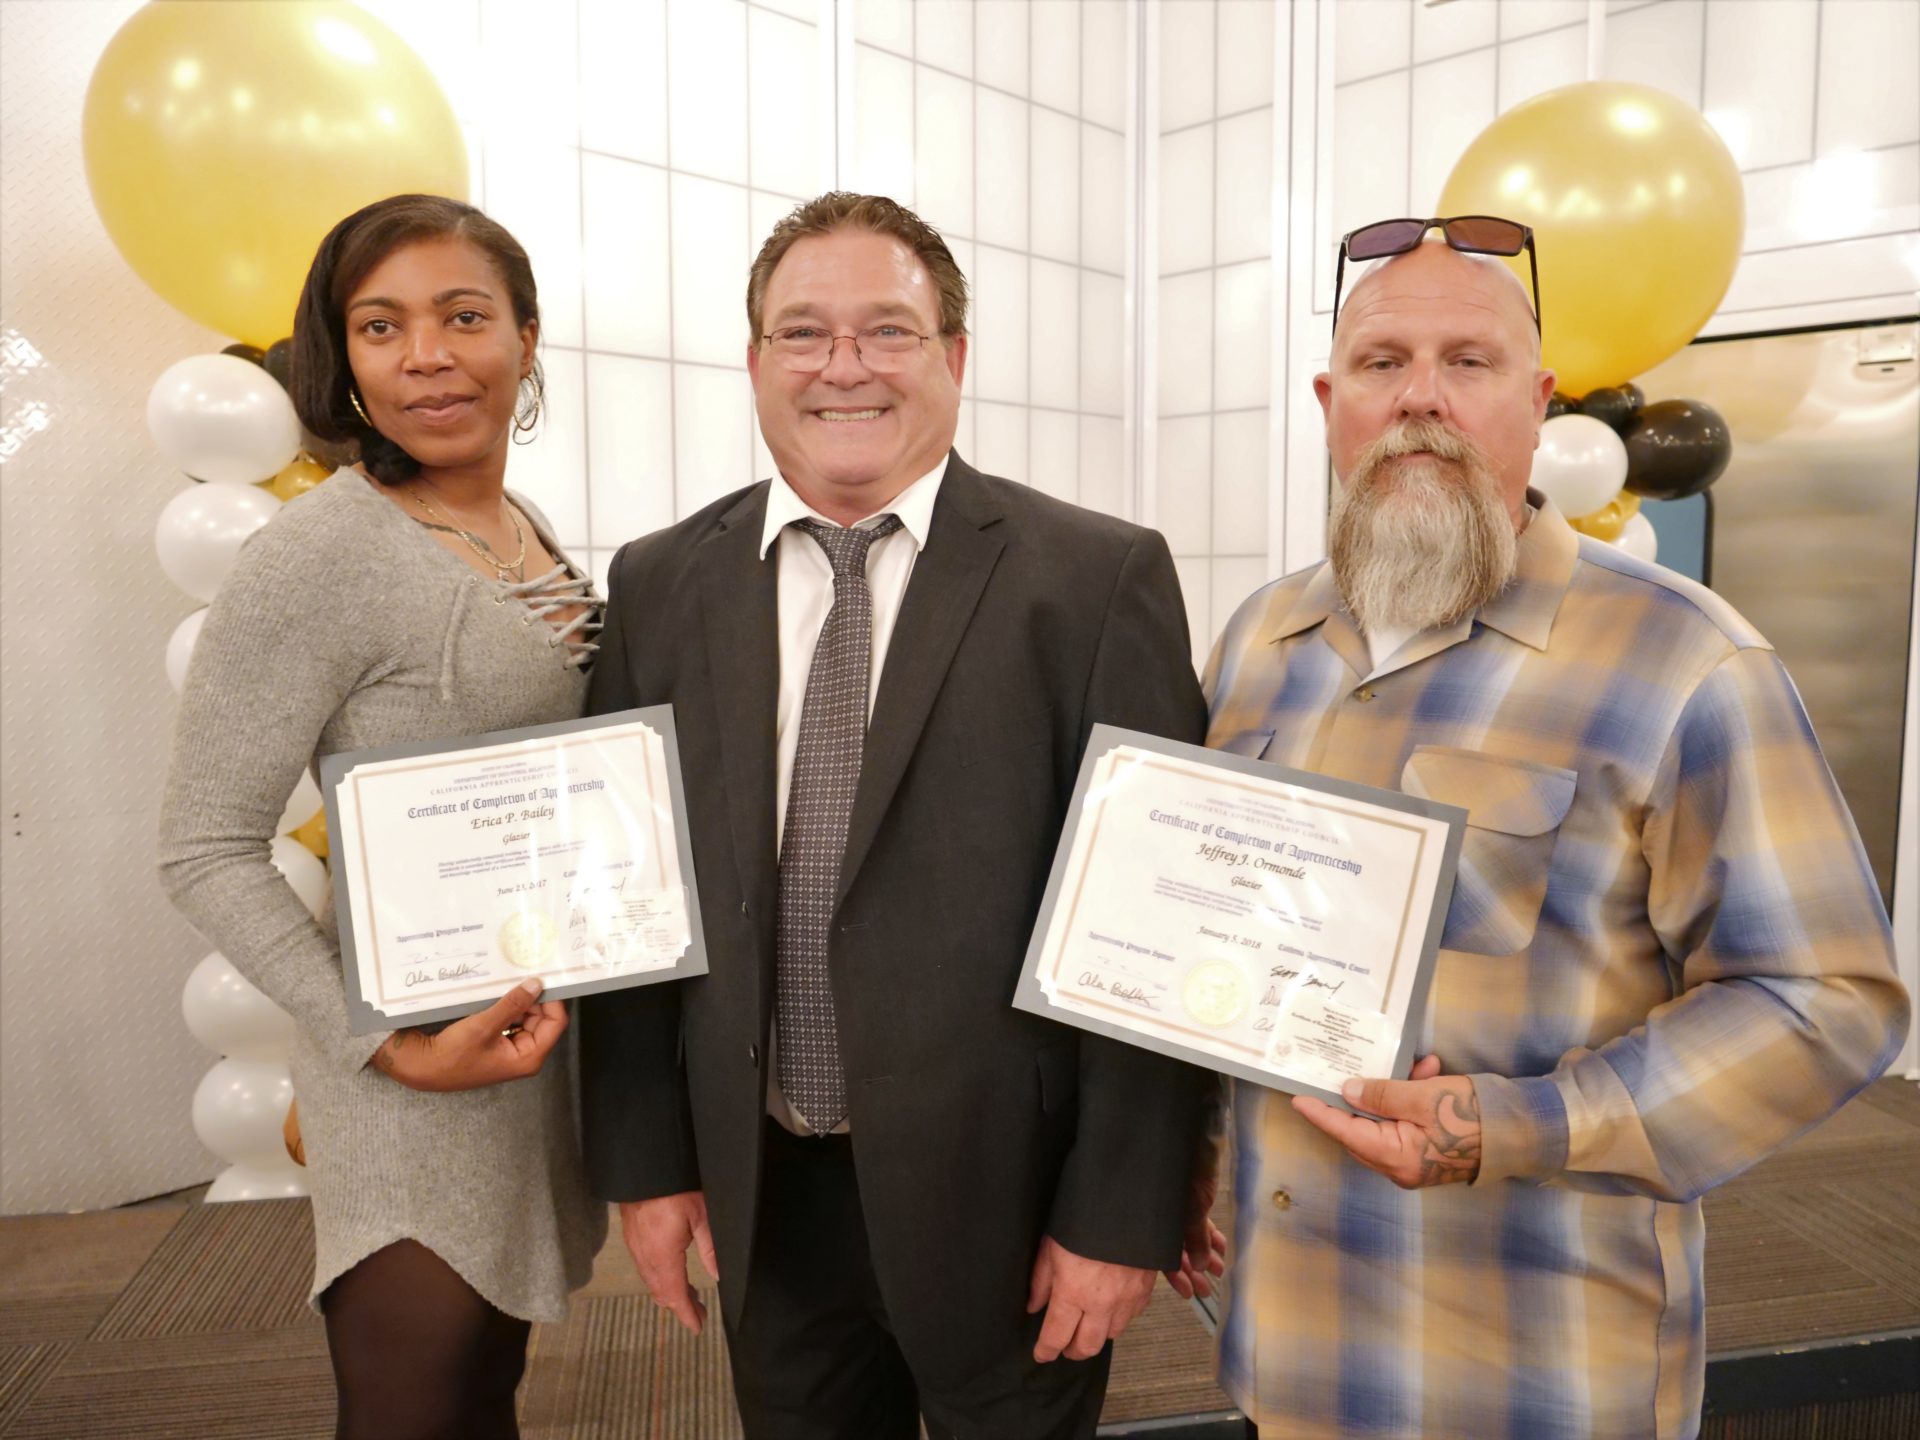 Image from the Gallery: Apprentice Graduation – Oakland, CA